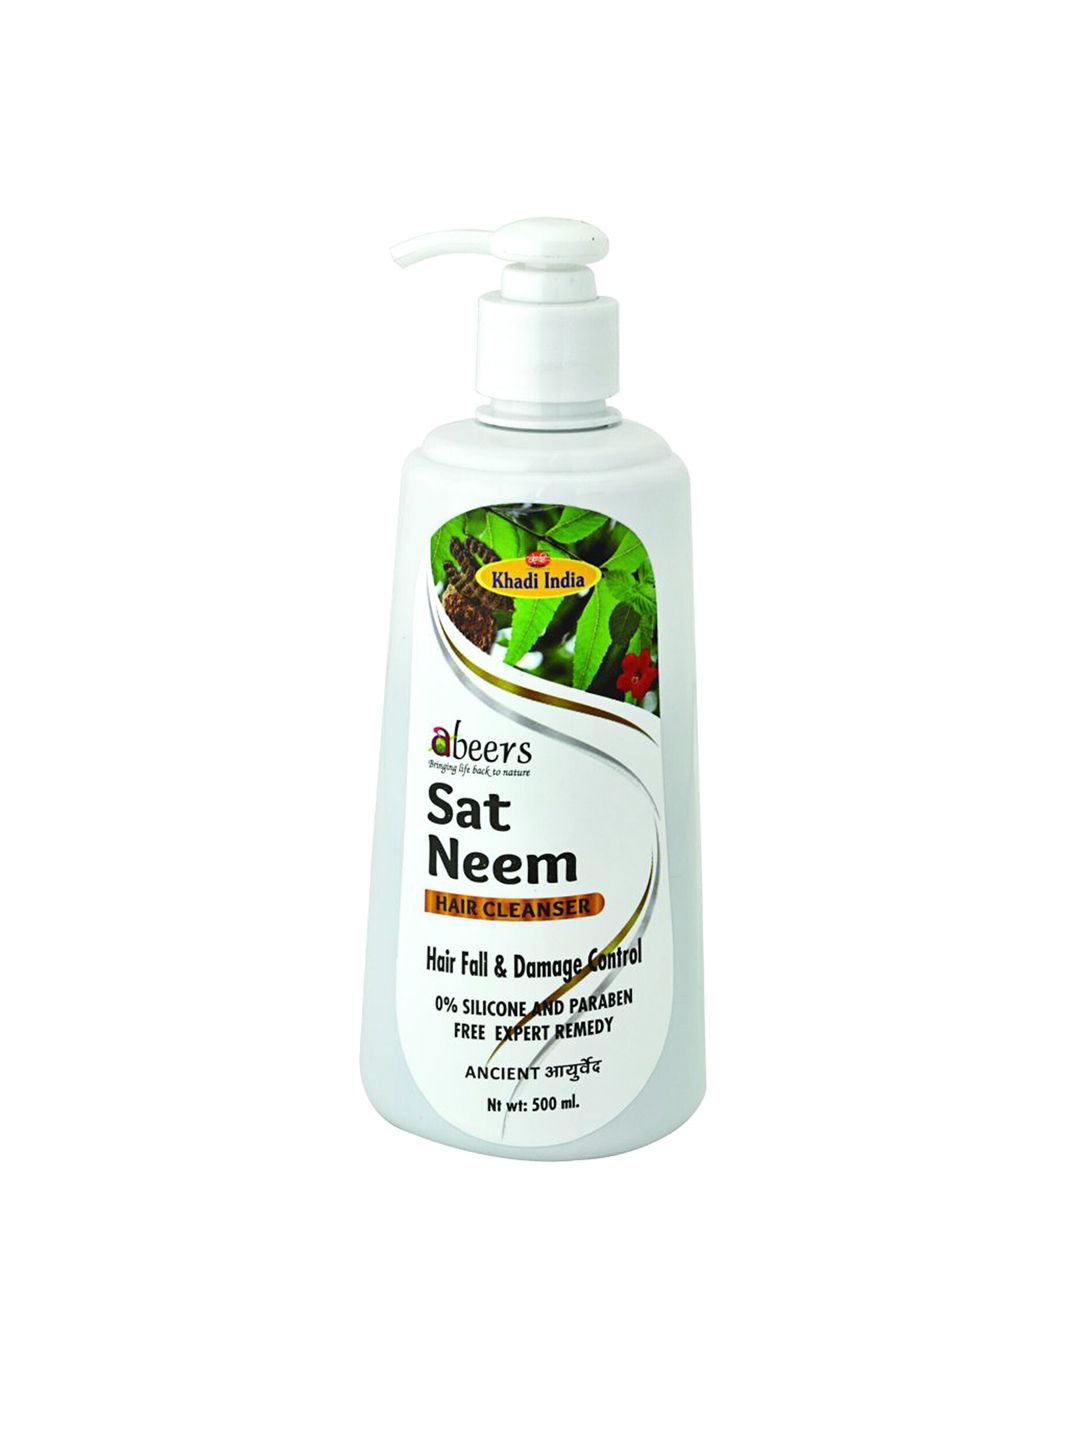 Abeers Ancient Sat Neem Hair Cleasner For Hair Fall & Damage Control 500m Price in India